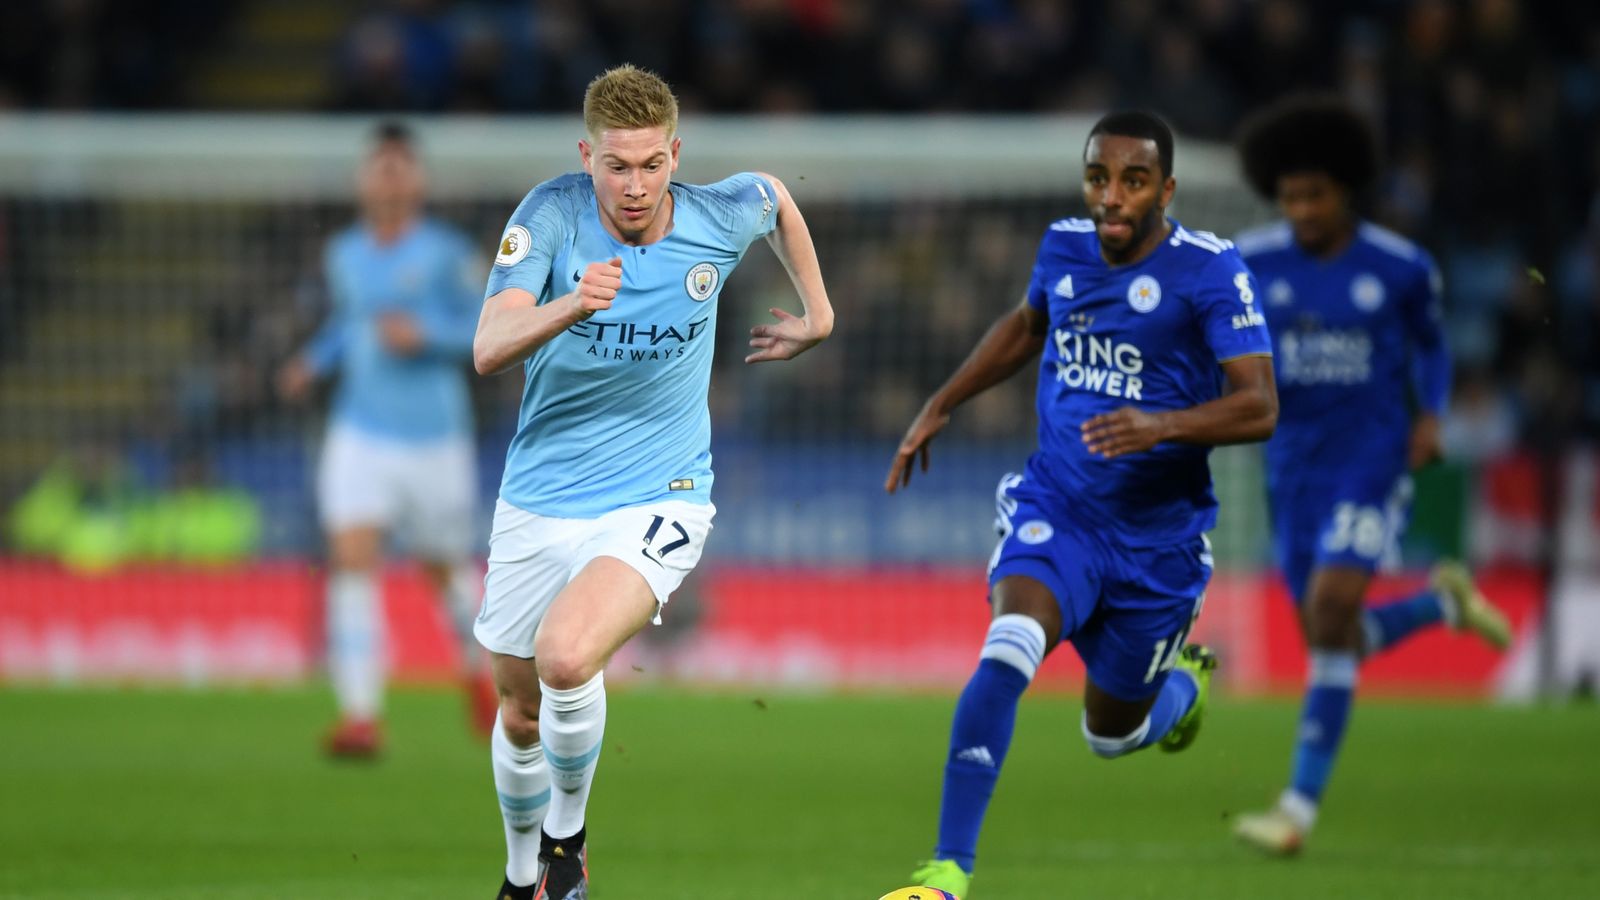 kevin de bruyne boots sports direct